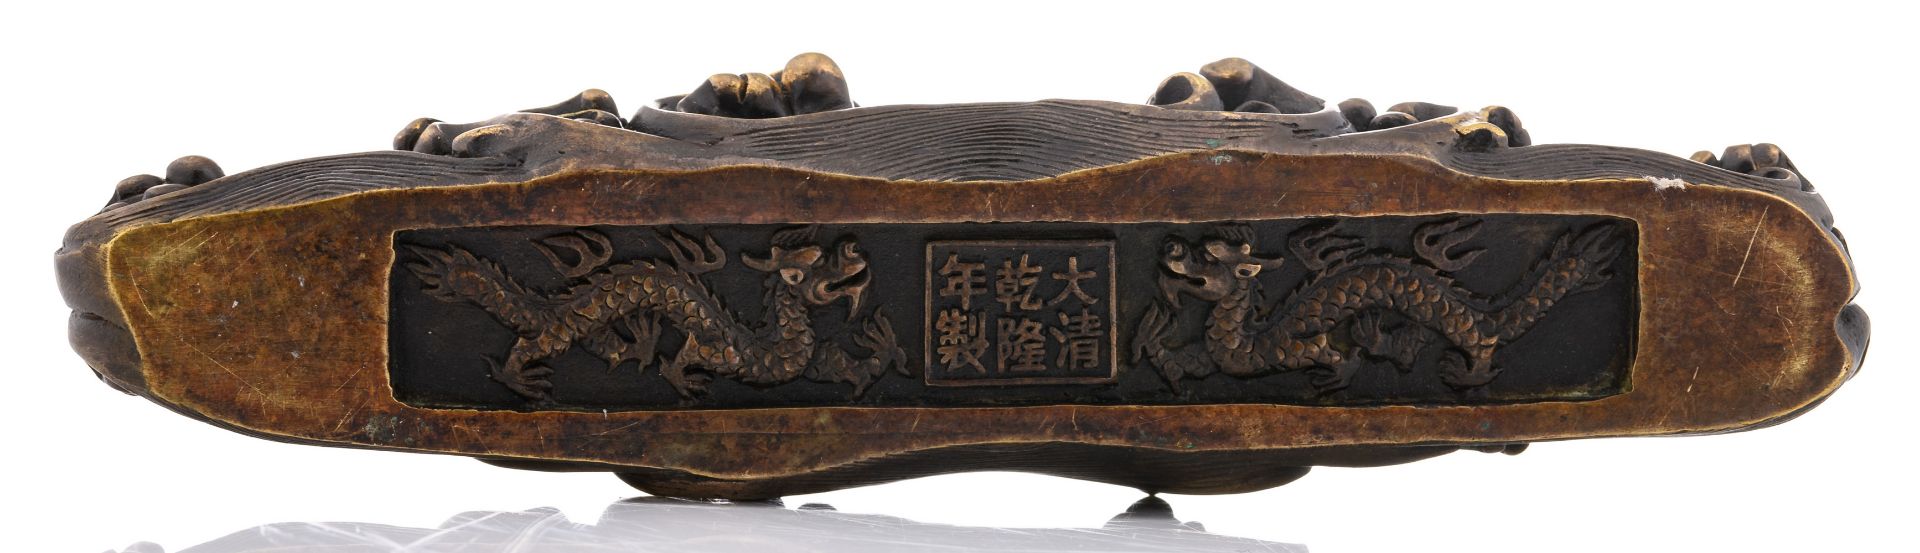 A Chinese patinated bronze scholar's brush rest depicting chilong climbing rocks situated in - Image 6 of 6